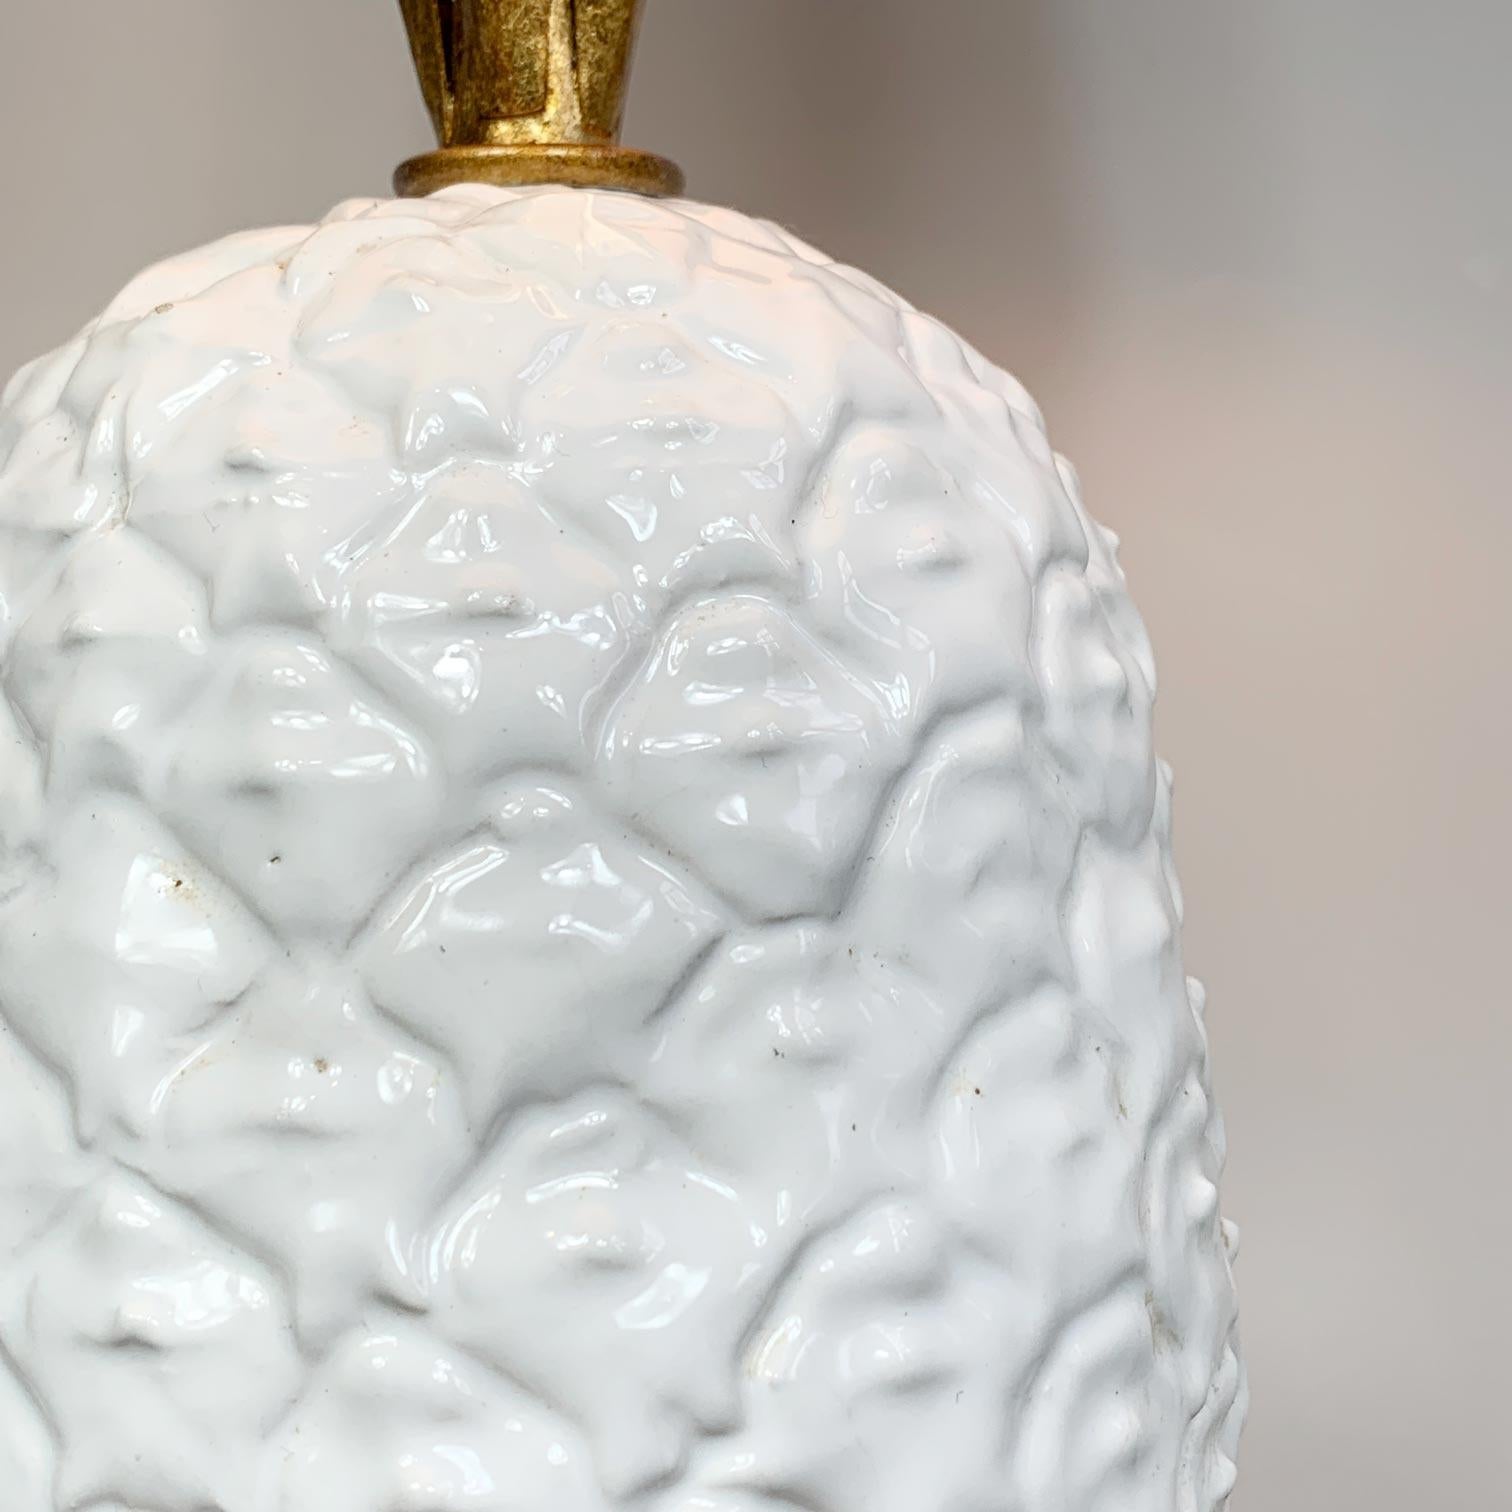 Mid-20th Century Italian White and Gold Metal Ceramic Pineapple Table Lamp For Sale